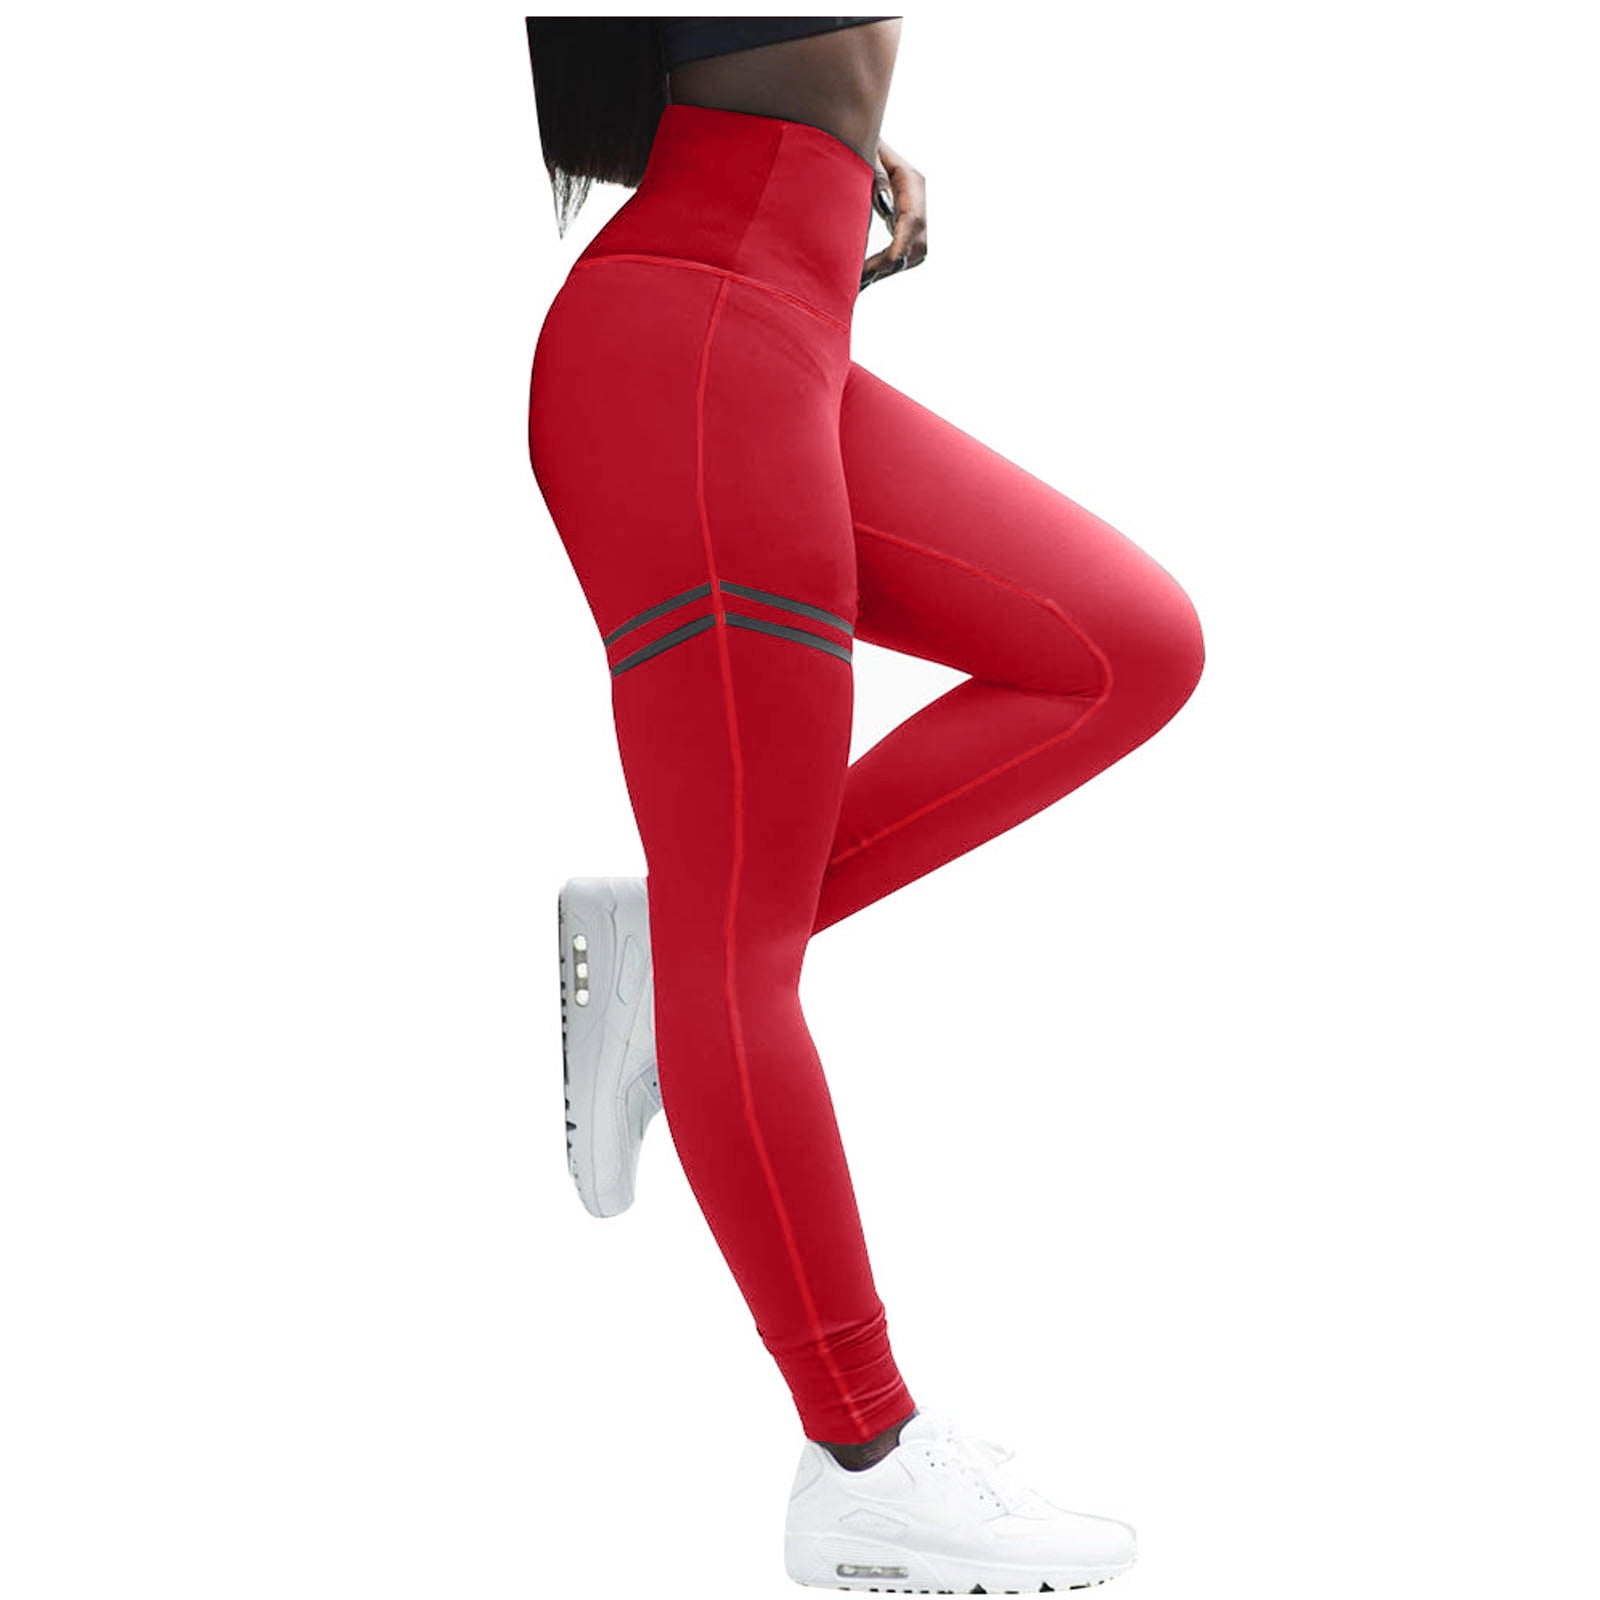 HAPIMO Sales Women's Yoga Pants Hip Lift Tights Tummy Control Workout Pants High  Waist Slimming Stretch Athletic Running Yoga Leggings for Women Red L 